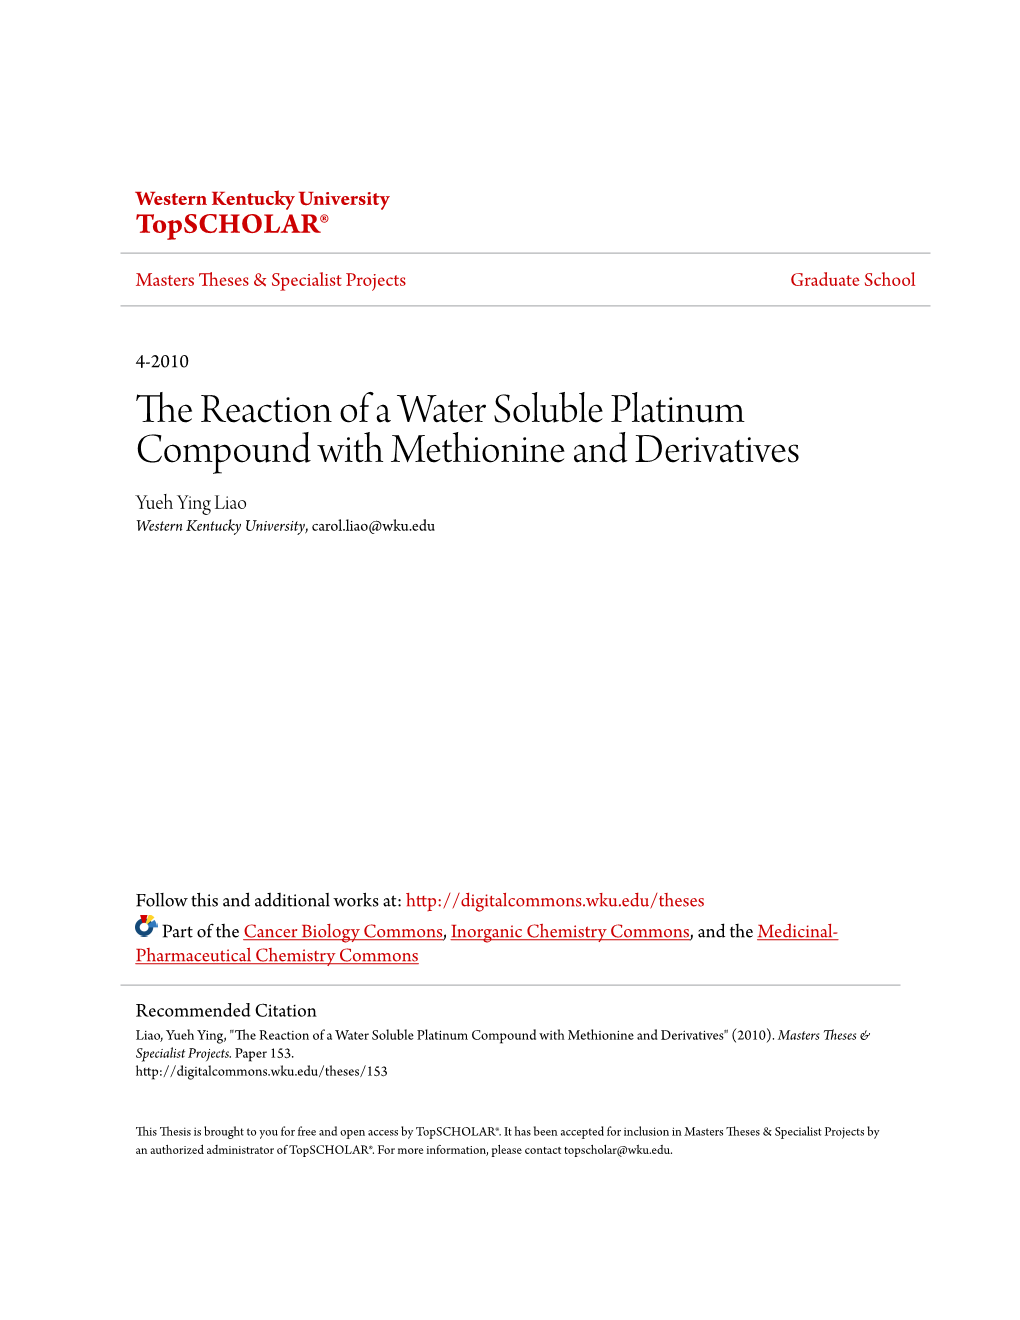 The Reaction of a Water Soluble Platinum Compound with Methionine and Derivatives Yueh Ying Liao Western Kentucky University, Carol.Liao@Wku.Edu